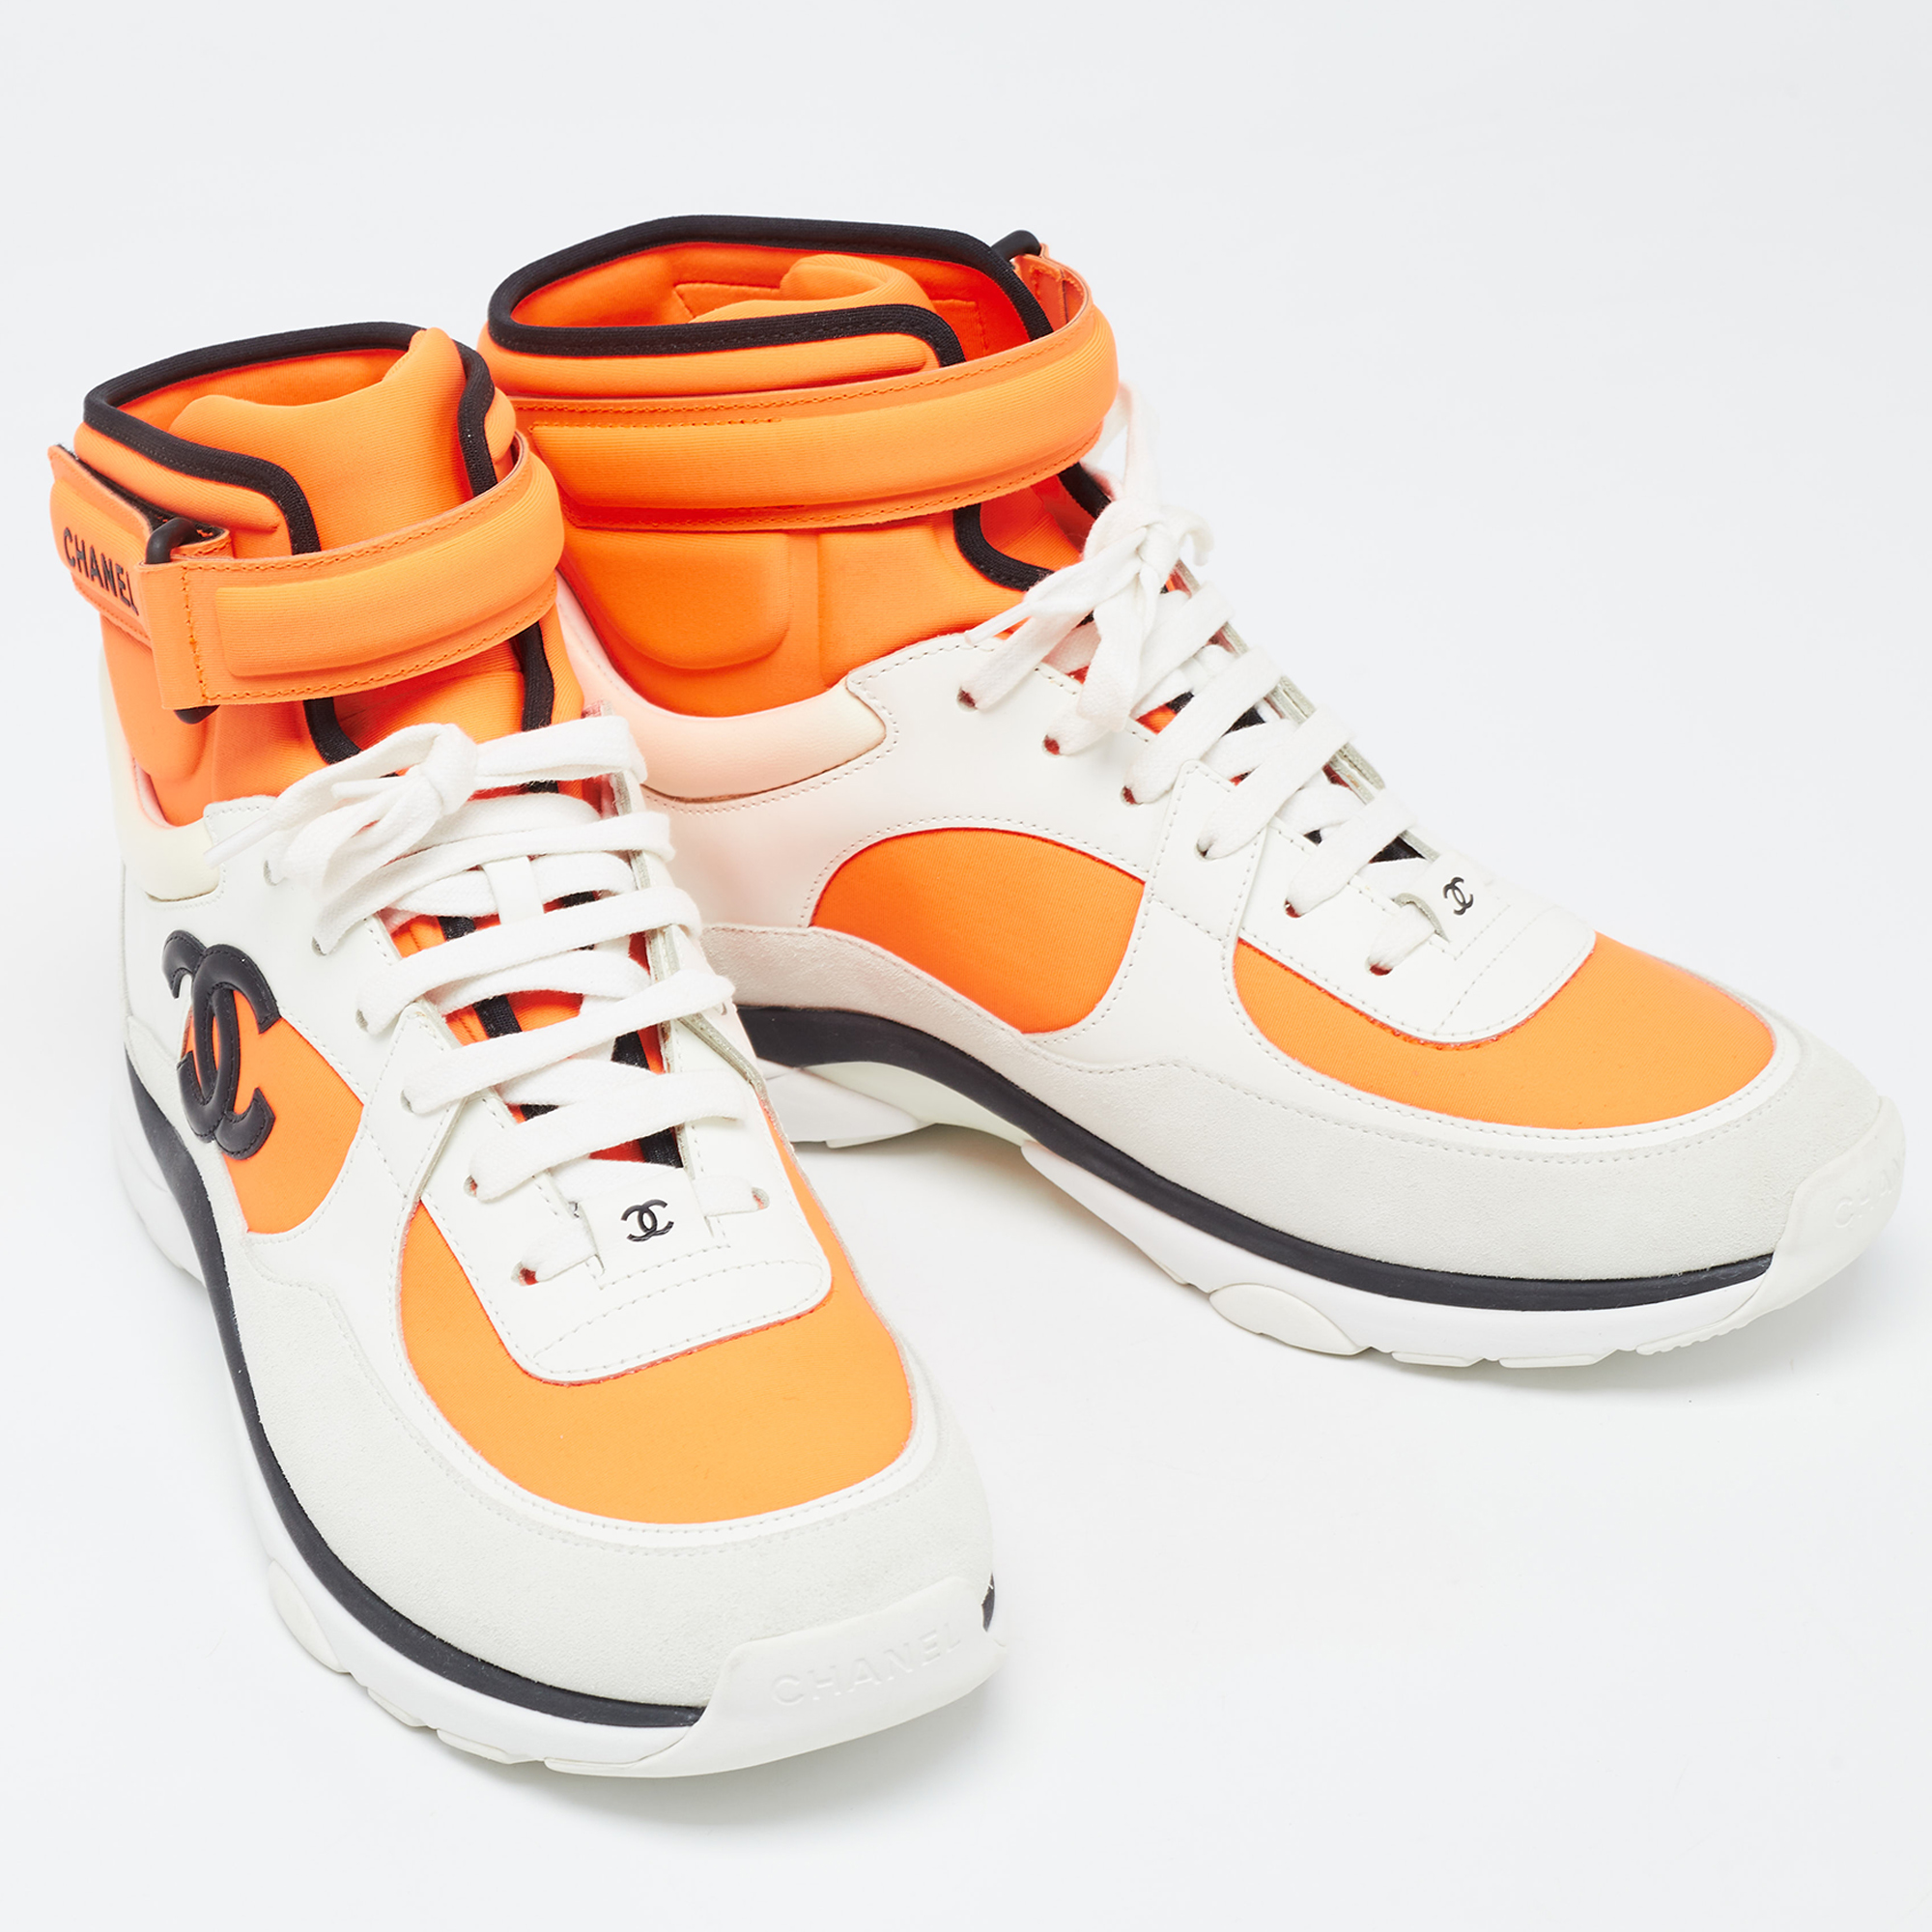 Chanel Neon Orange/White Neoprene And Leather CC High Top Sneakers Size 40.5